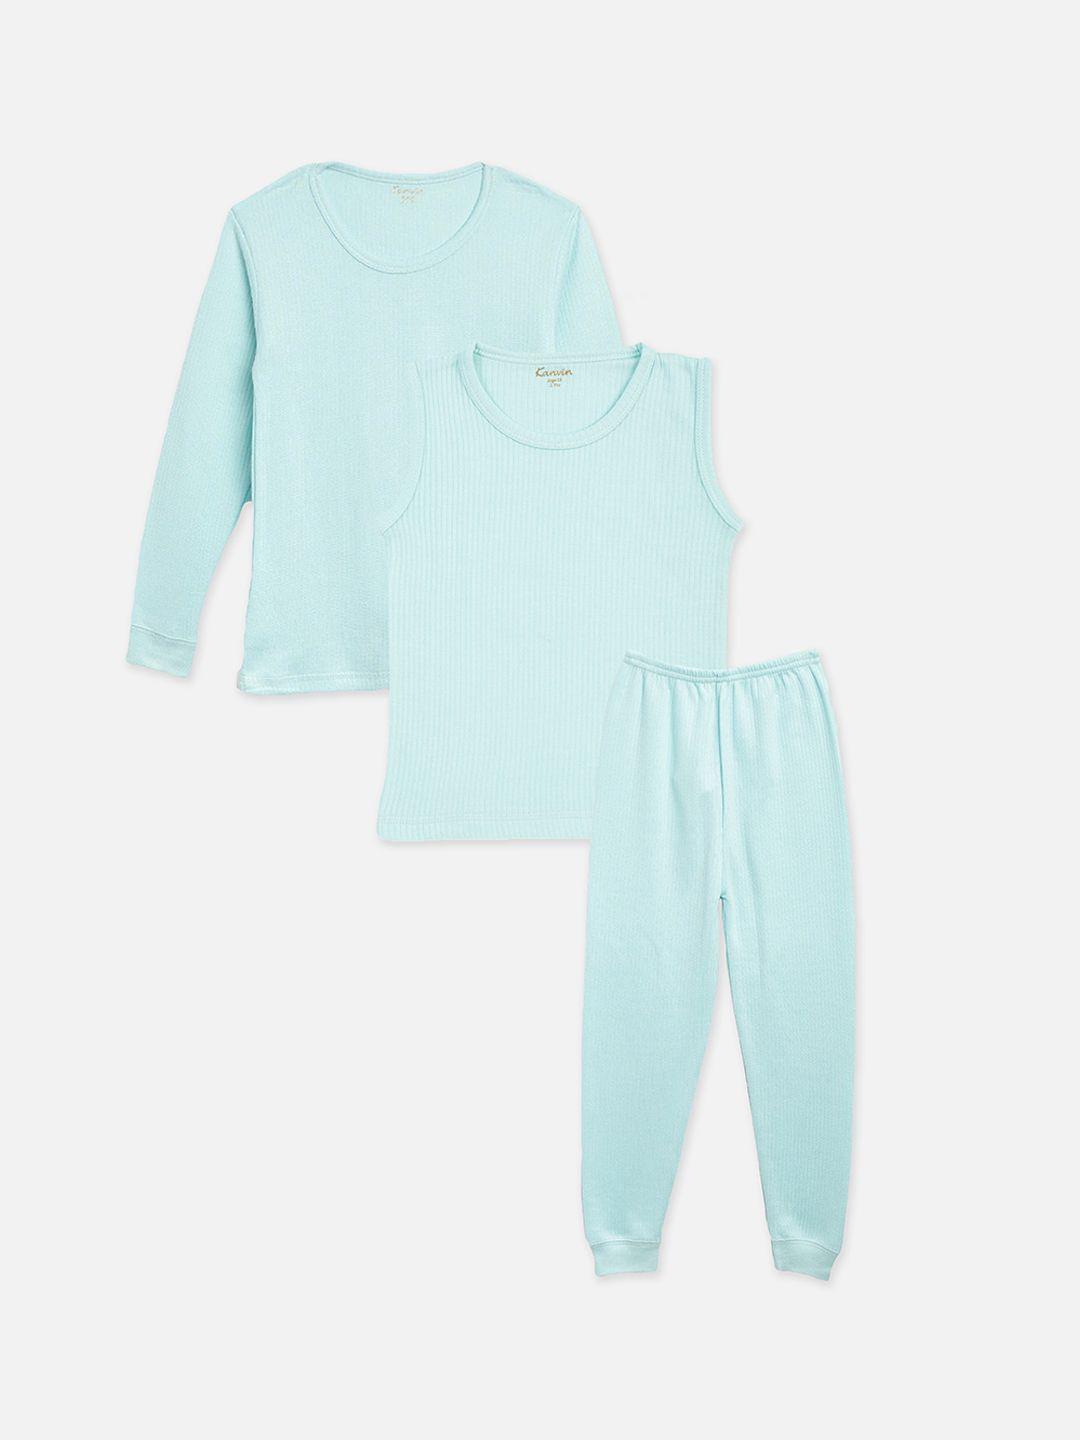 kanvin boys turquoise blue striped thermal set